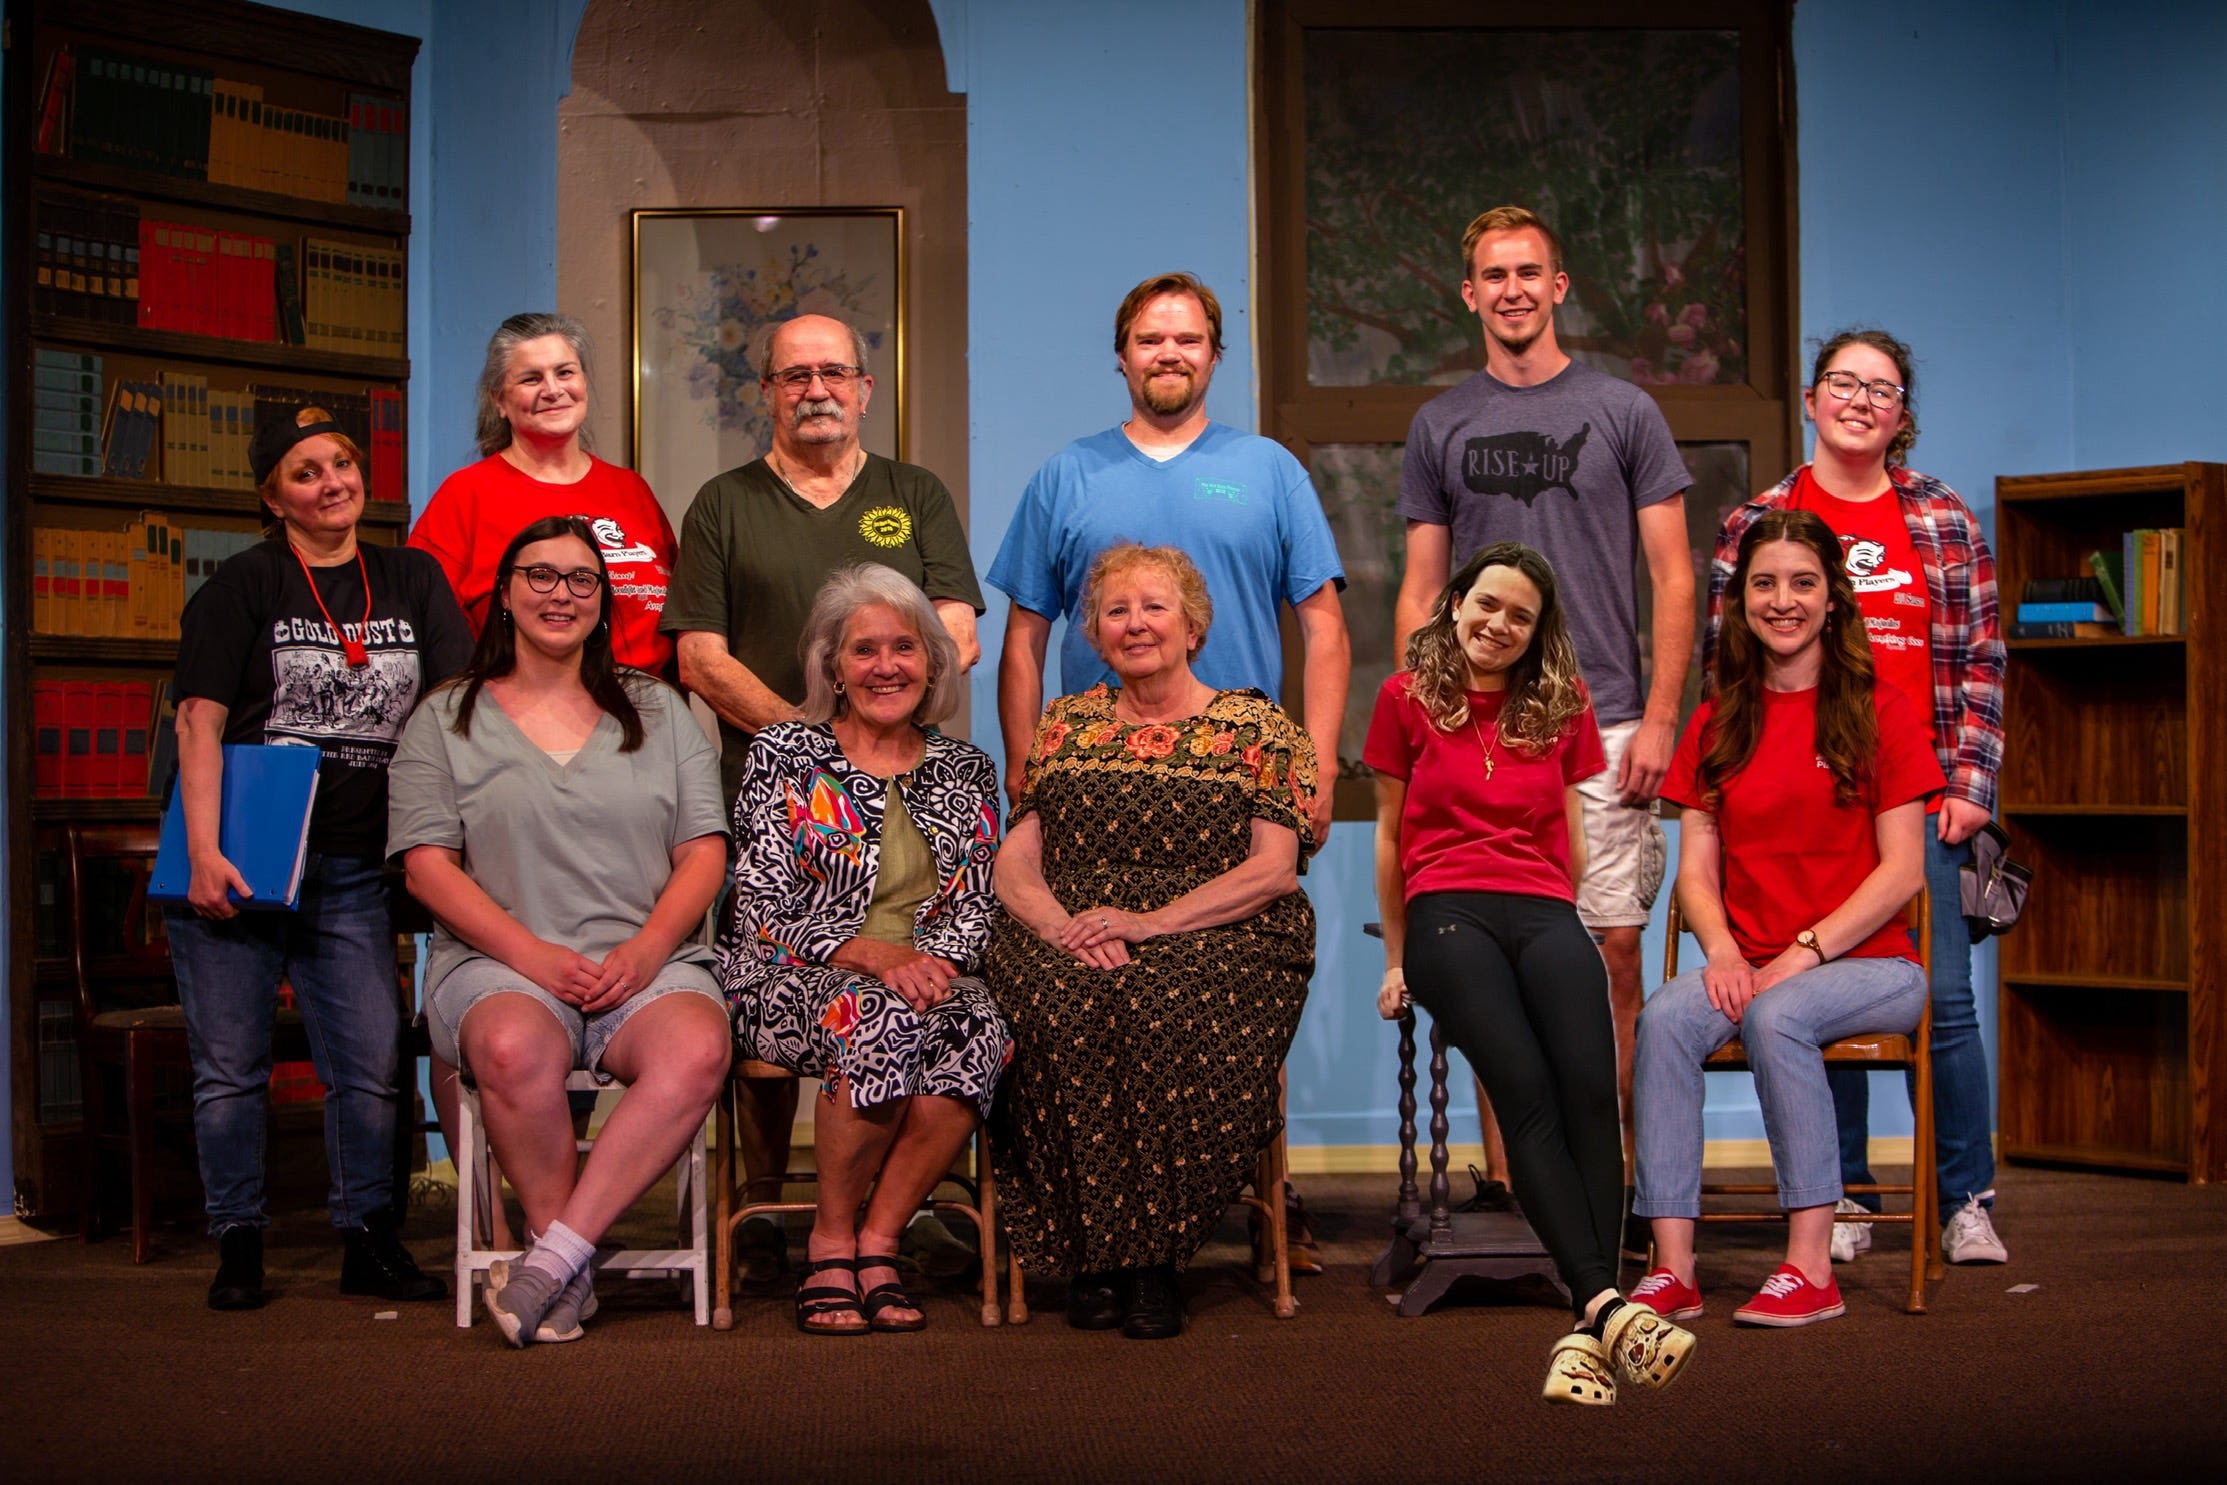 'Play On!' making Red Barn Theatre debut